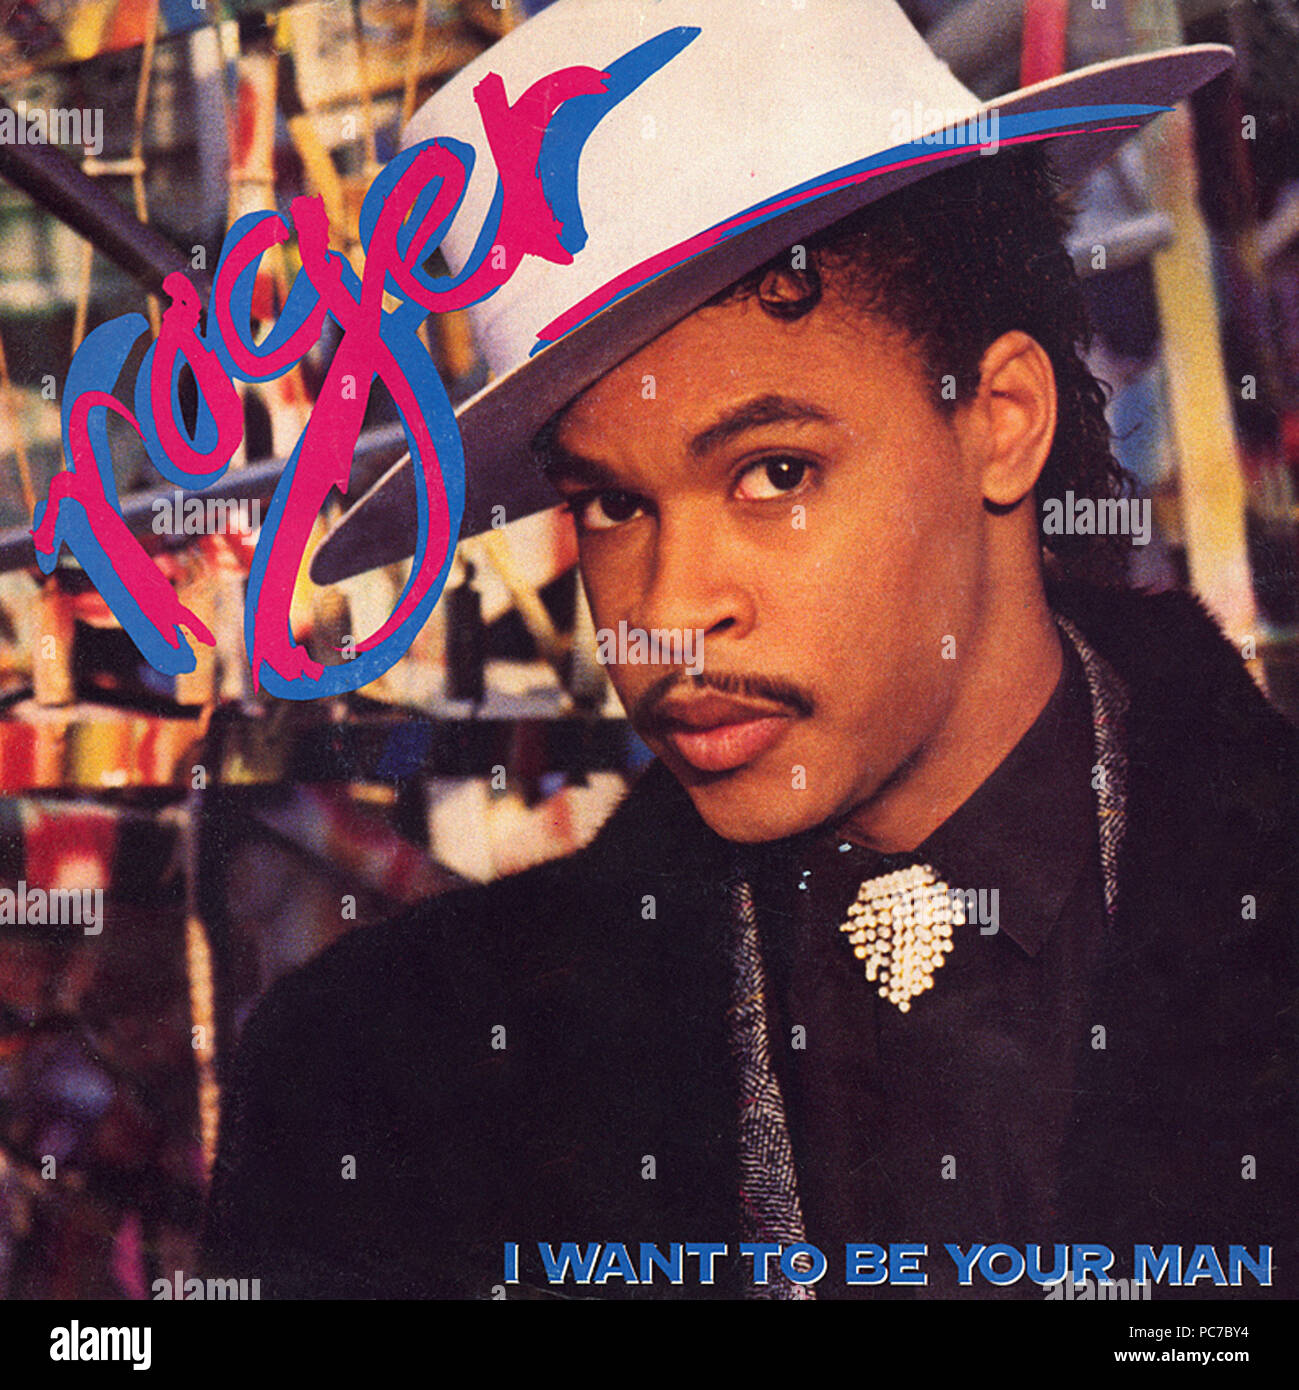 Roger – “I Want to be Your Man” b w “I Really want to be Your Man”  -  vintage vinyl cover album (Front) Stock Photo